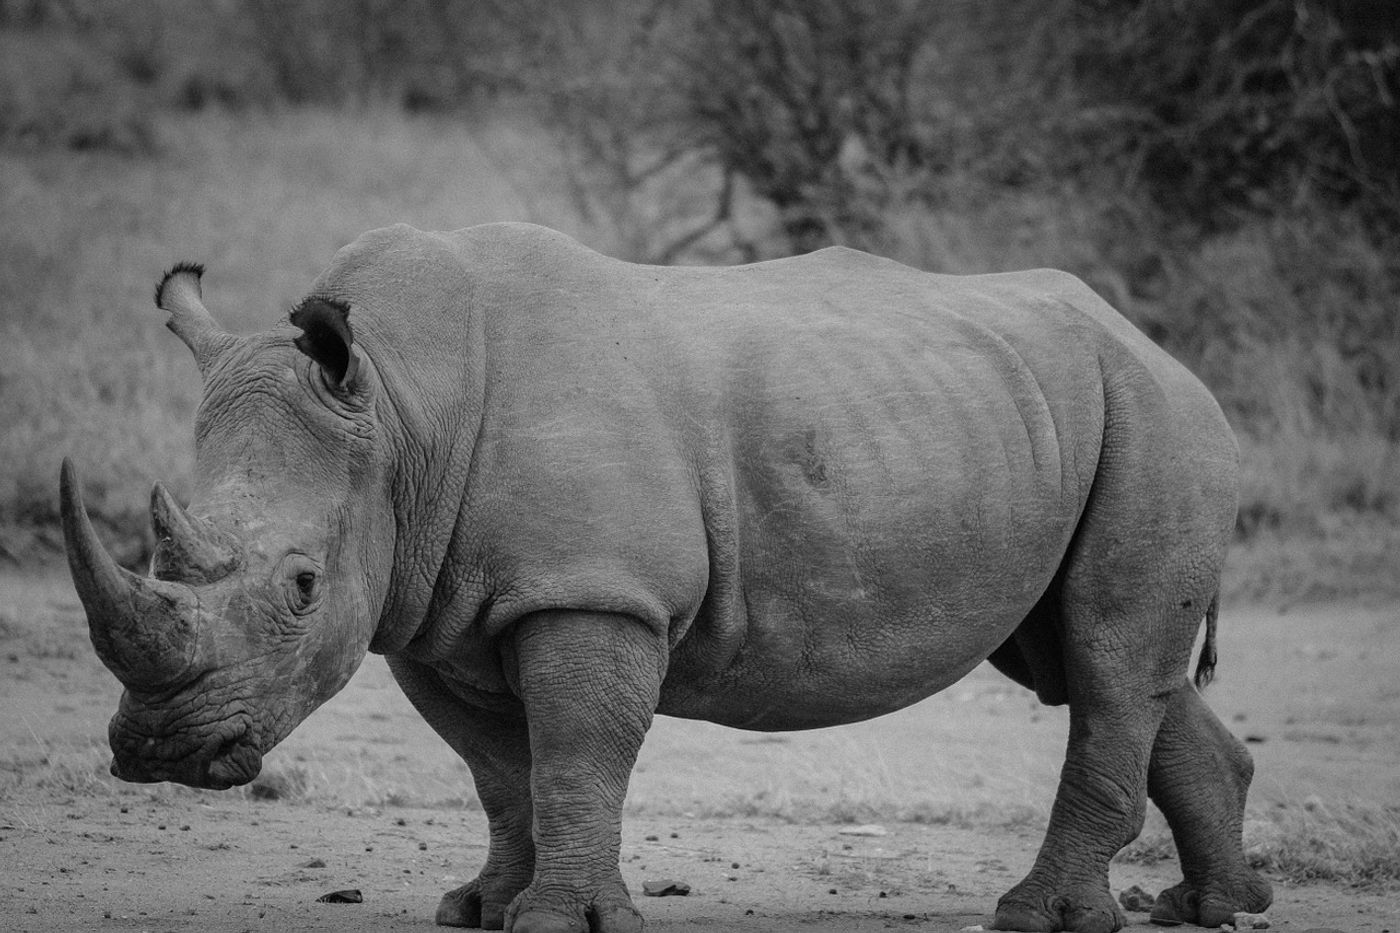 Very few rhinos actually exist in the wild, outside of protected areas.